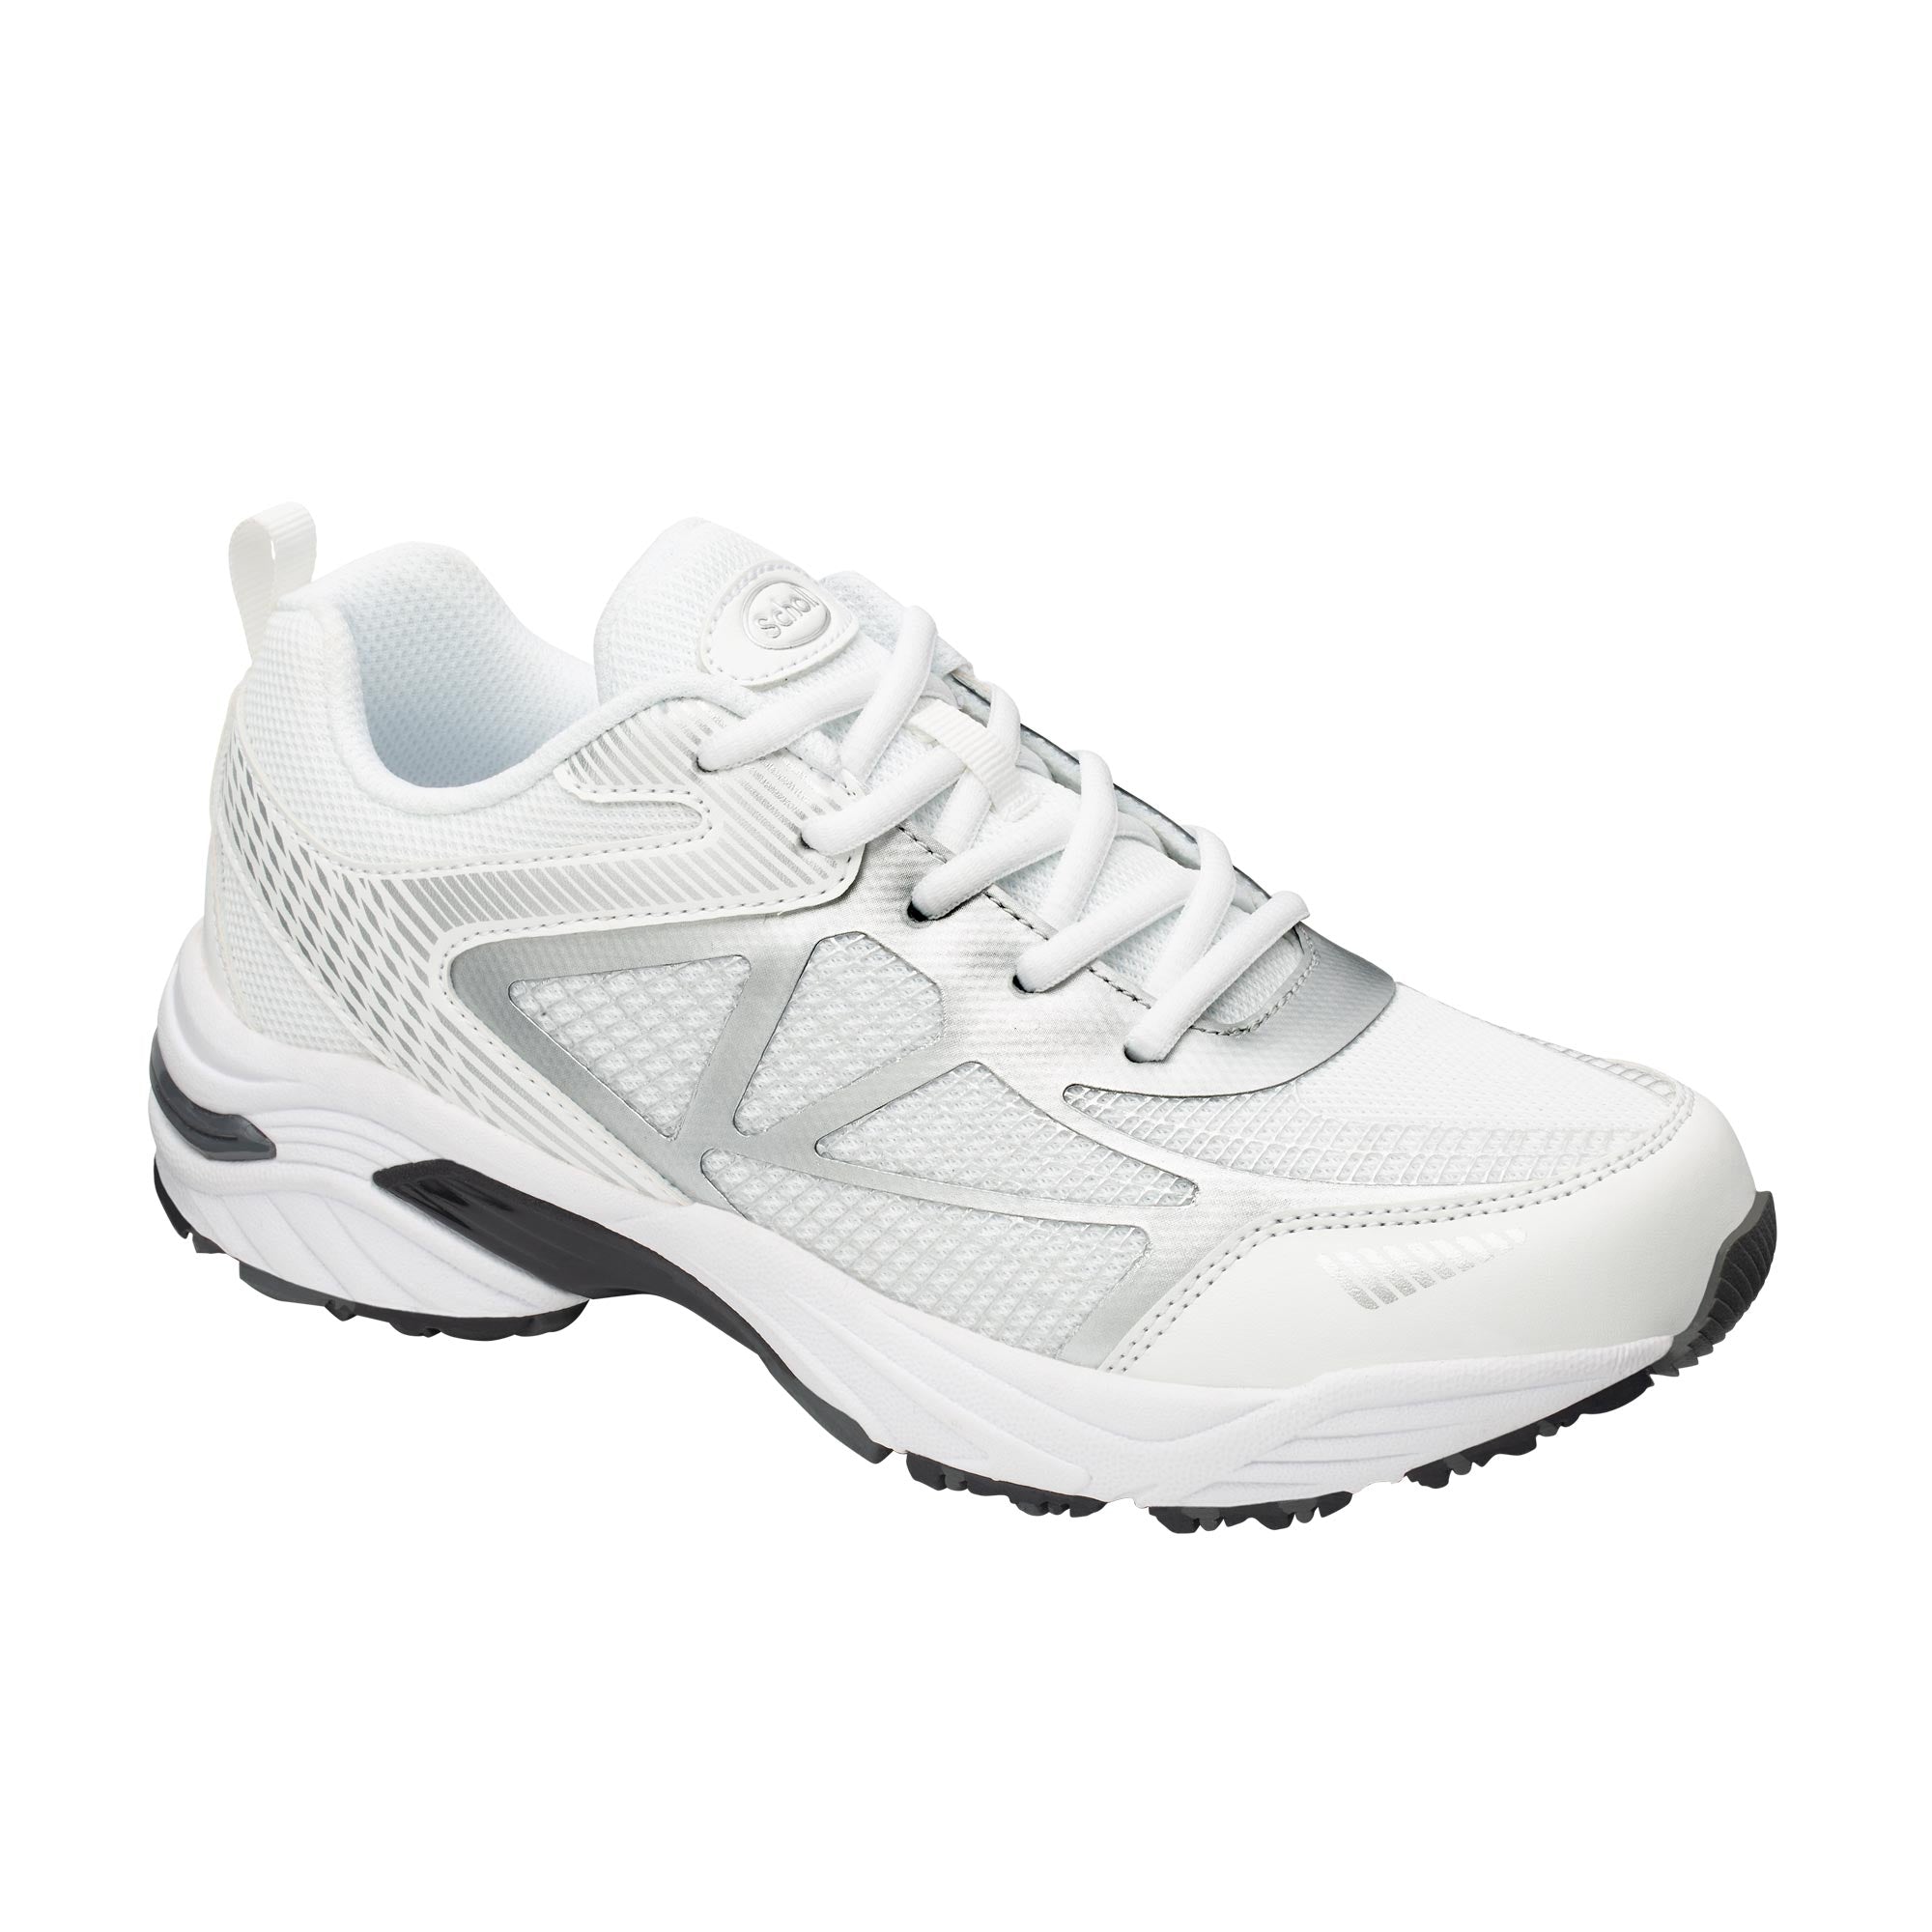 Sneakers White / Silver Sprinter Net | Scholl Shoes